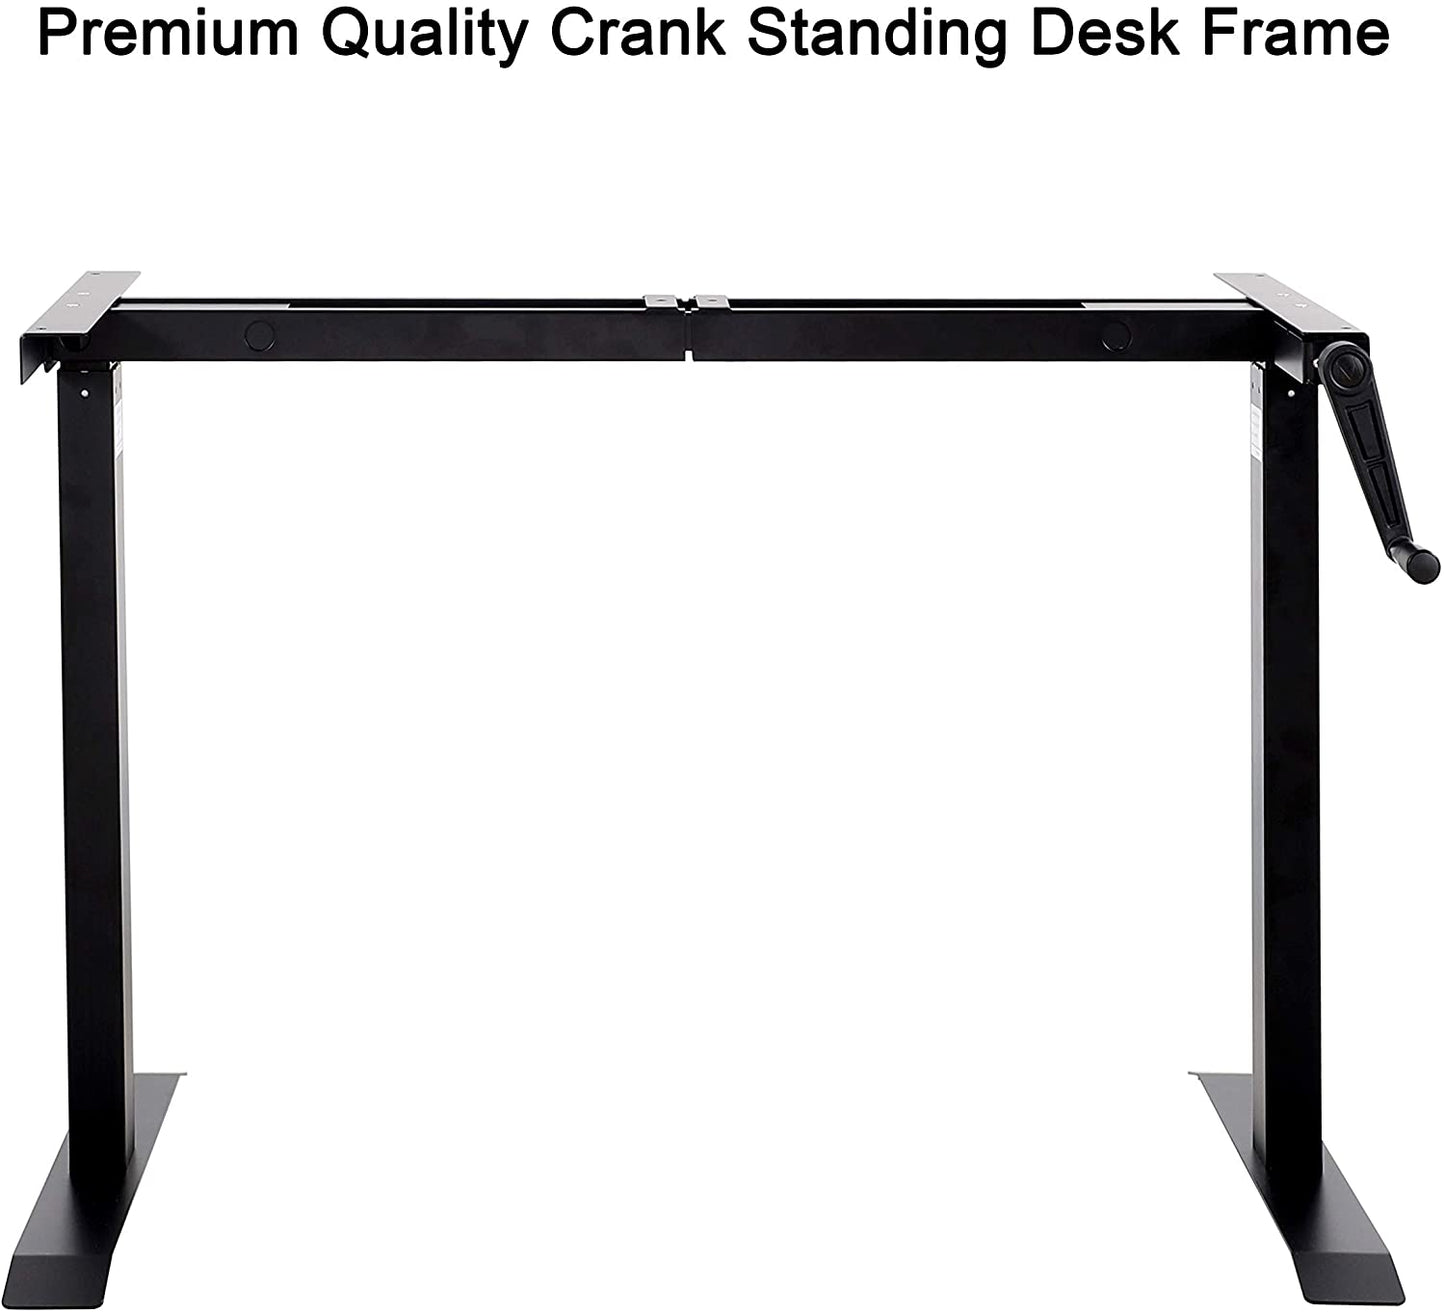 UNICOO – Premium Quality Crank Stand Up Desk Frame with Double Beam Heavy Duty Steel Construction, Adjustable Height Sit to Stand Up Desk Frame with Foldable Handle (Crank Frame)